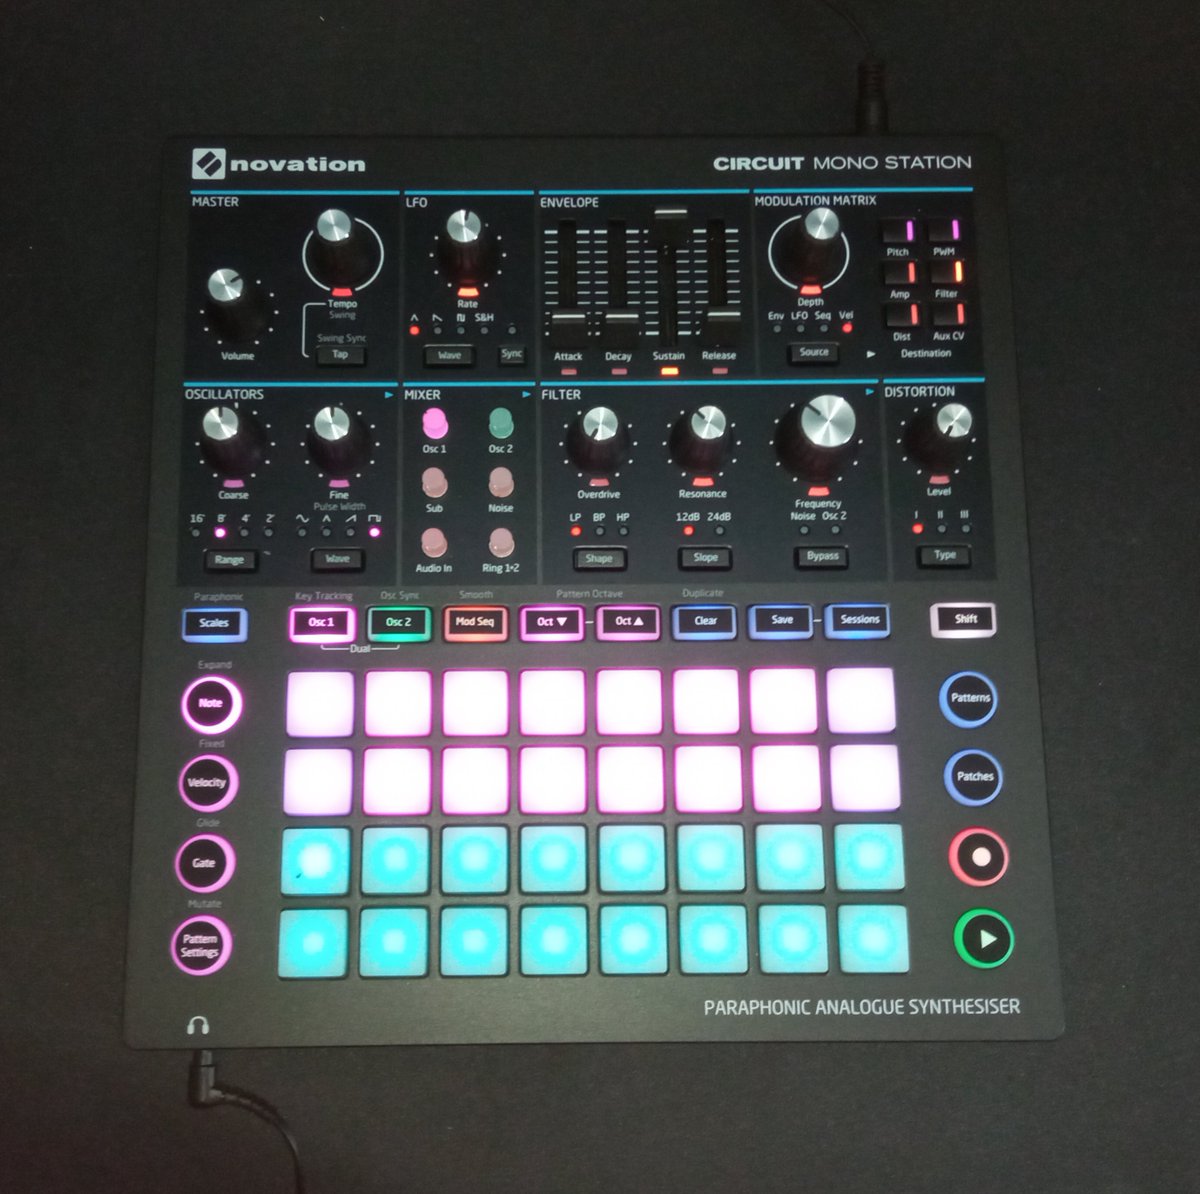 Very pleased to receive my Novation Circuit Mono Station.😁